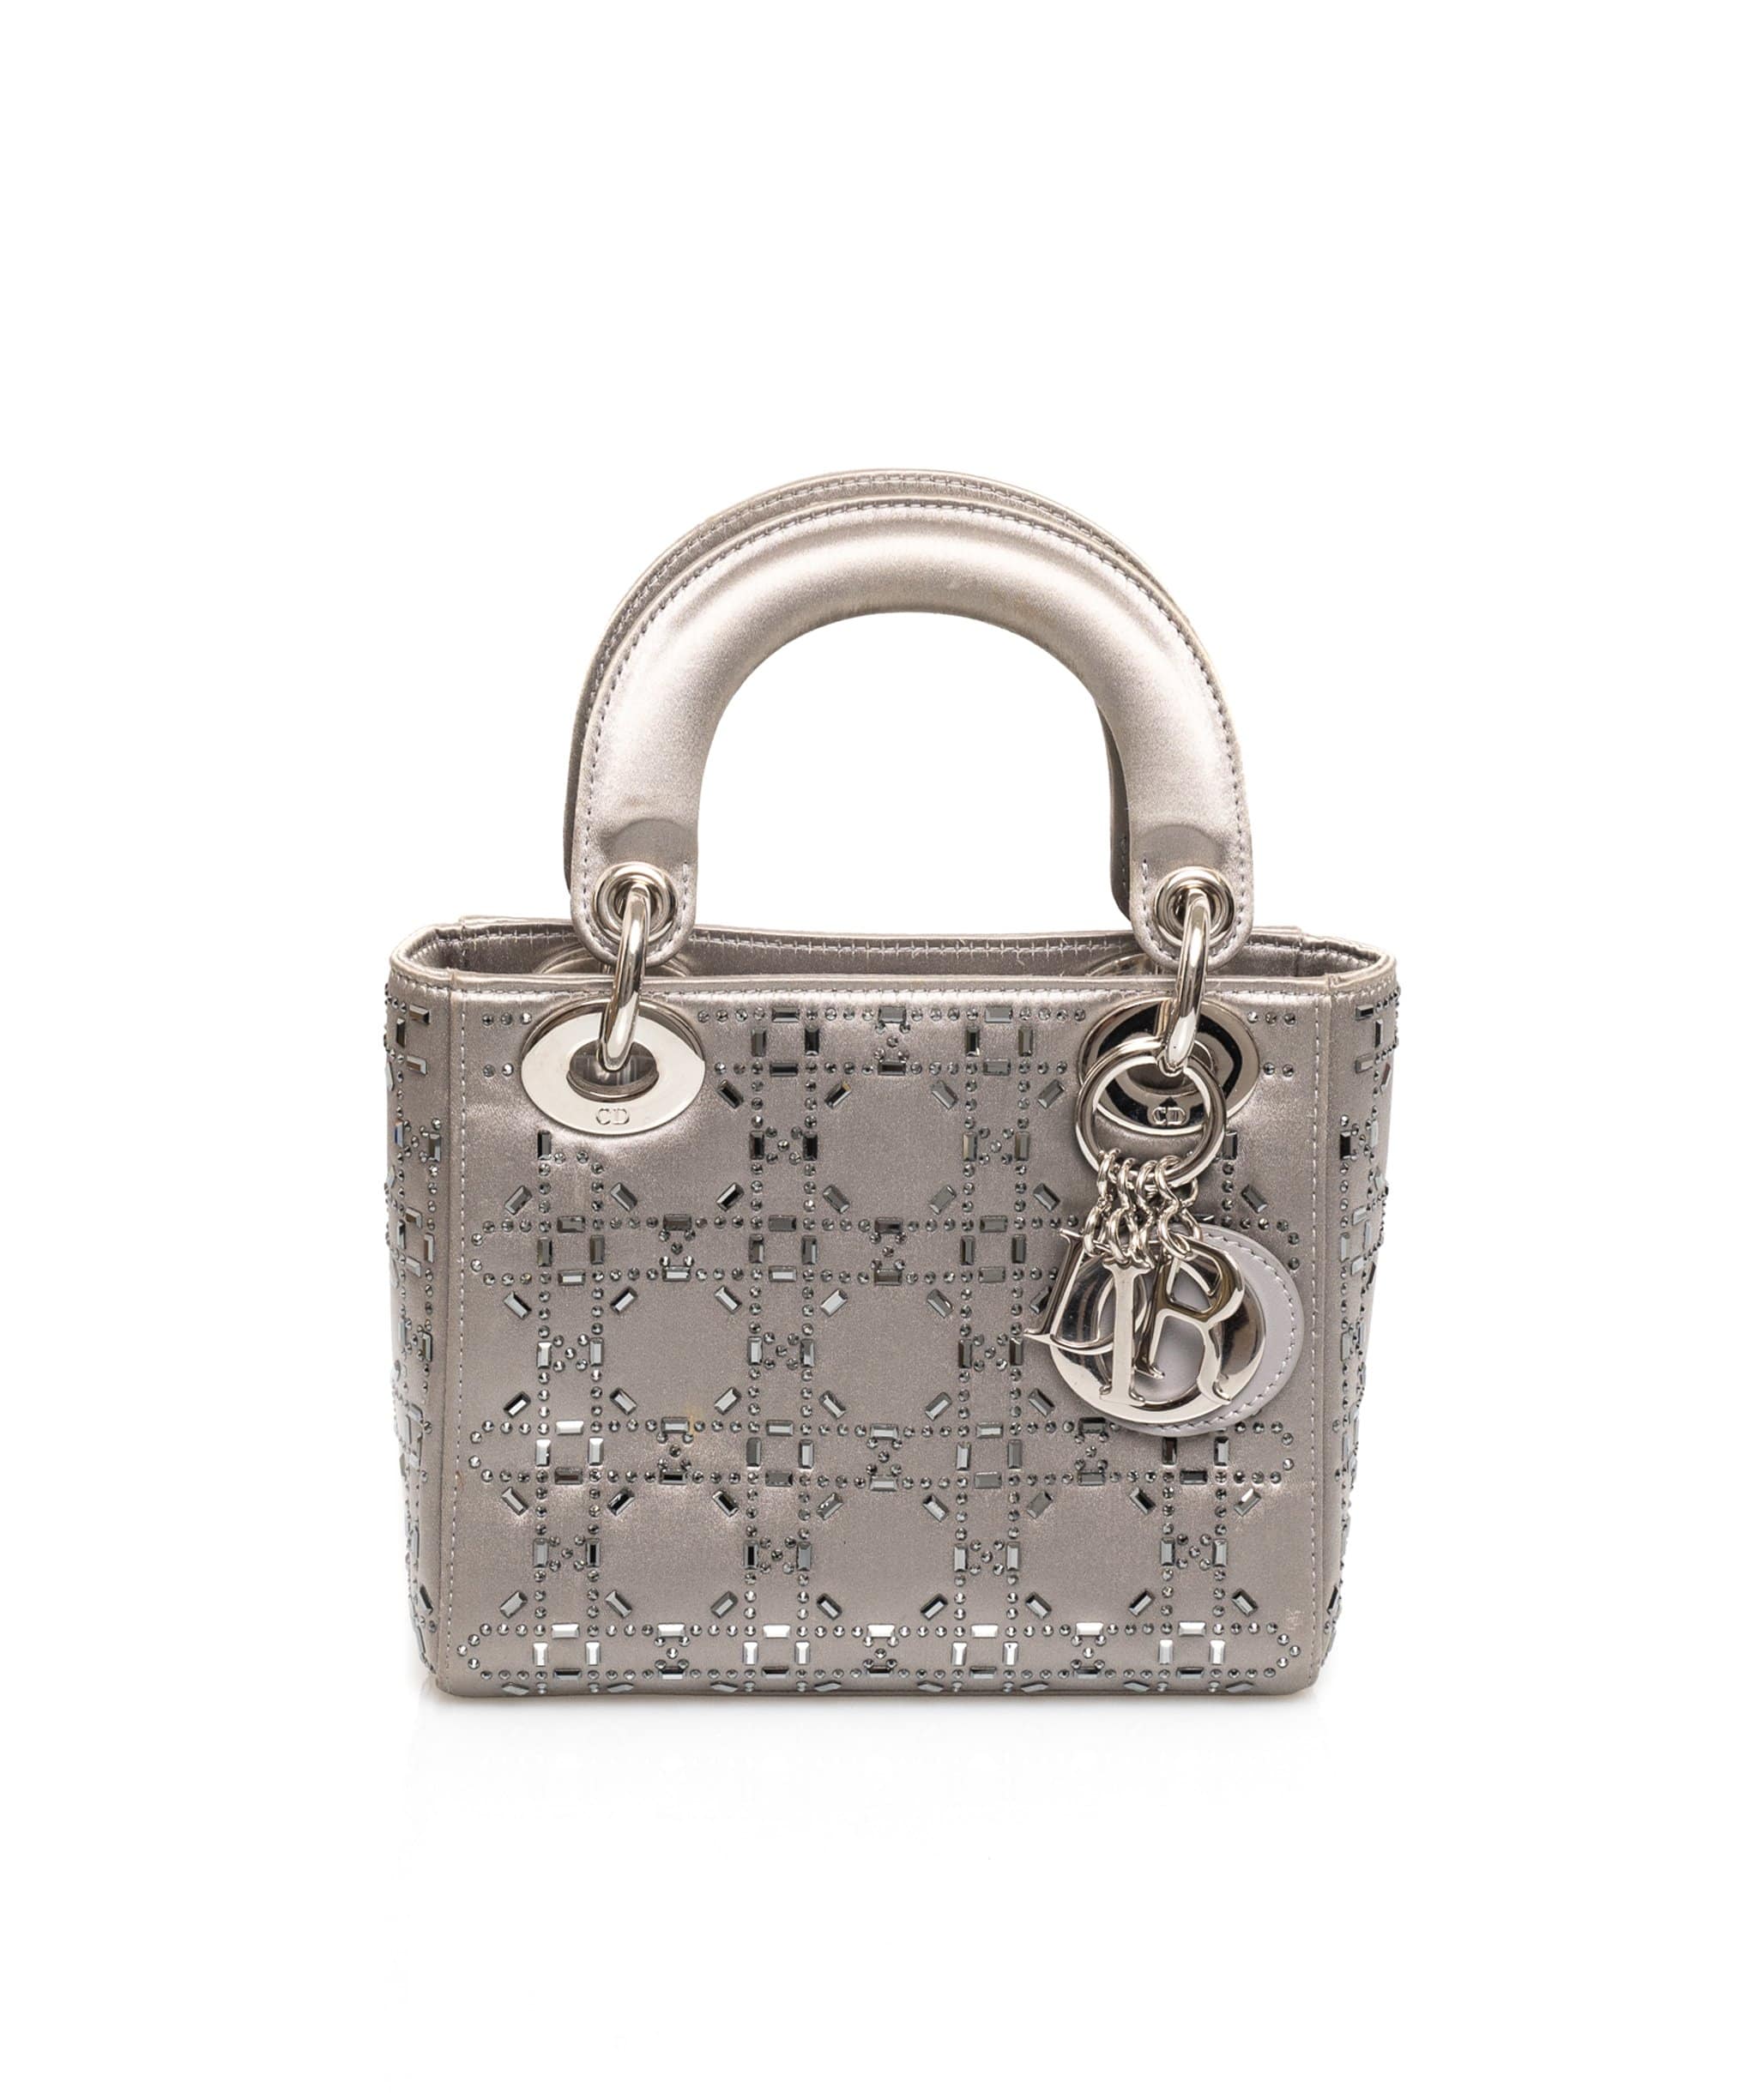 Lady Dior Mini in Silver Satin Bag with Crystal Details - AWL1627